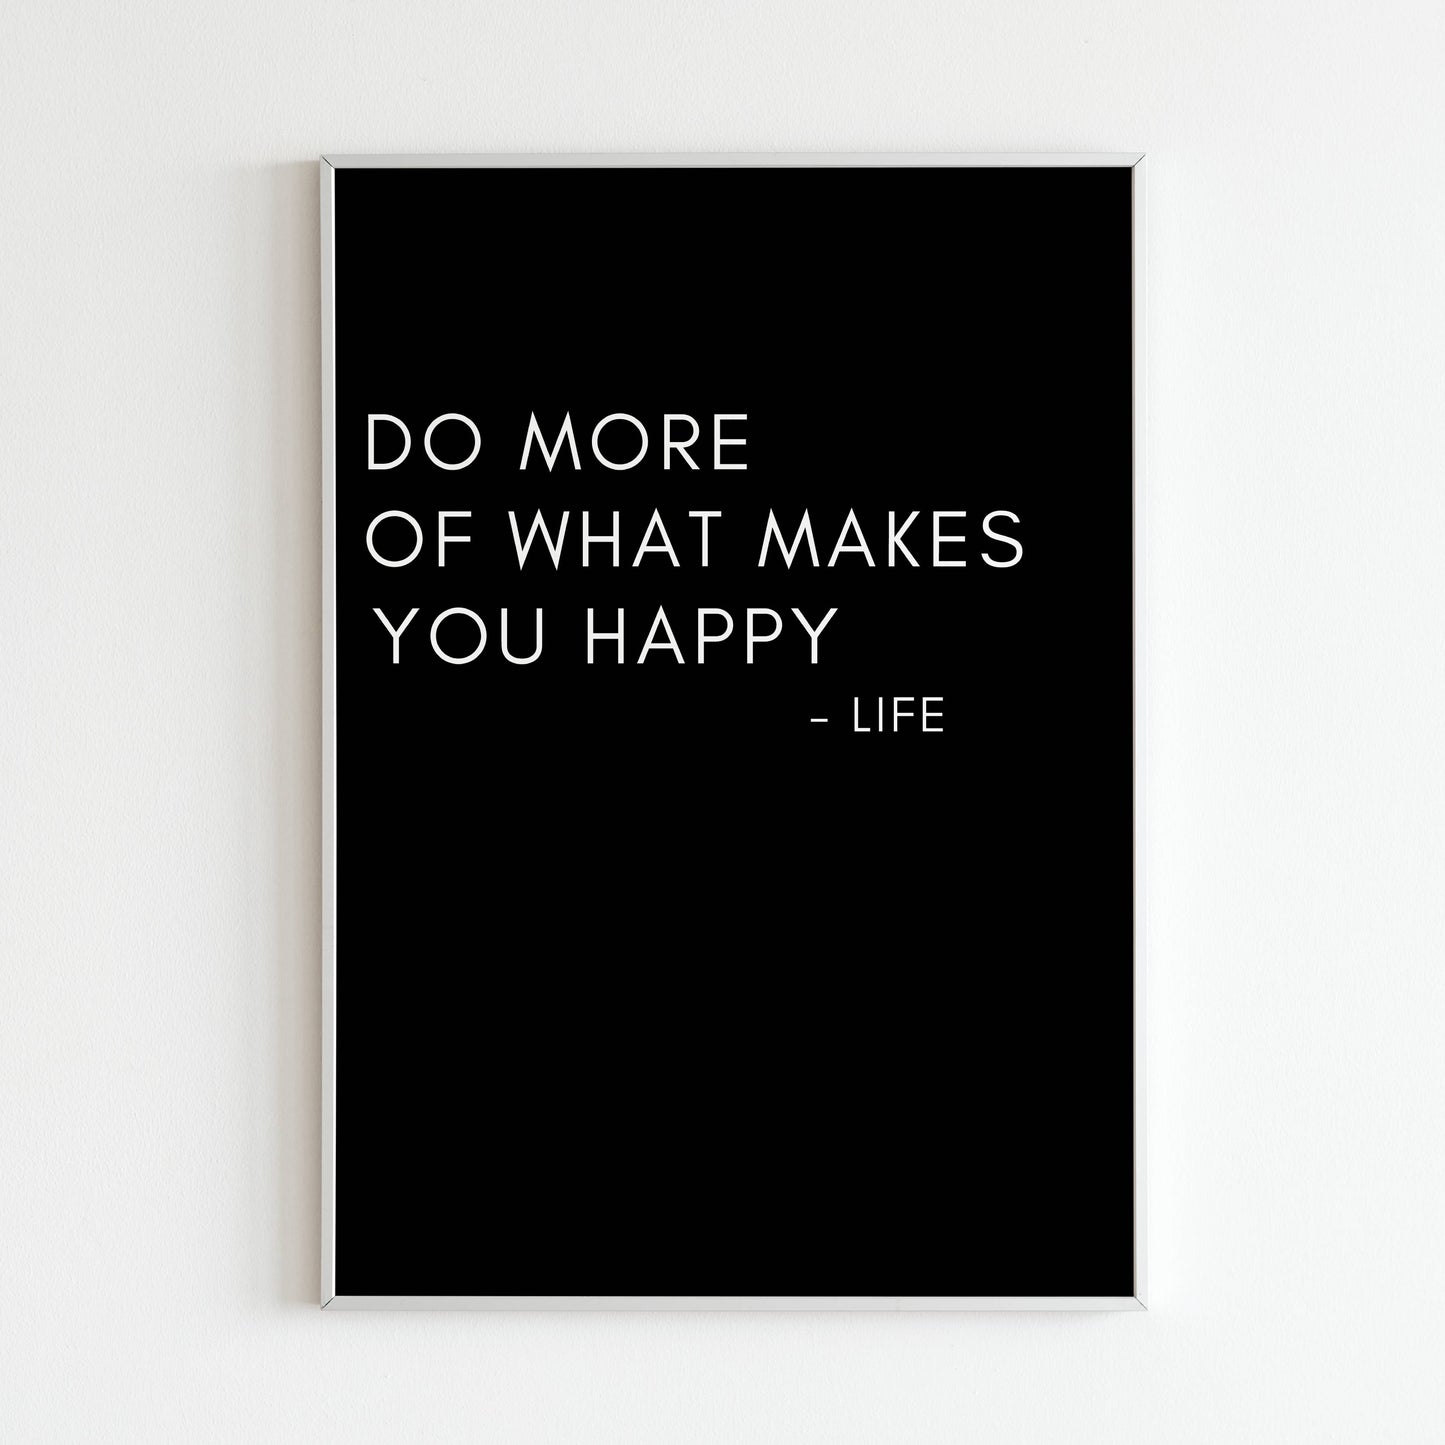 Downloadable "Do more of what makes you happy" art print, encourage prioritizing happiness and fulfillment in life.